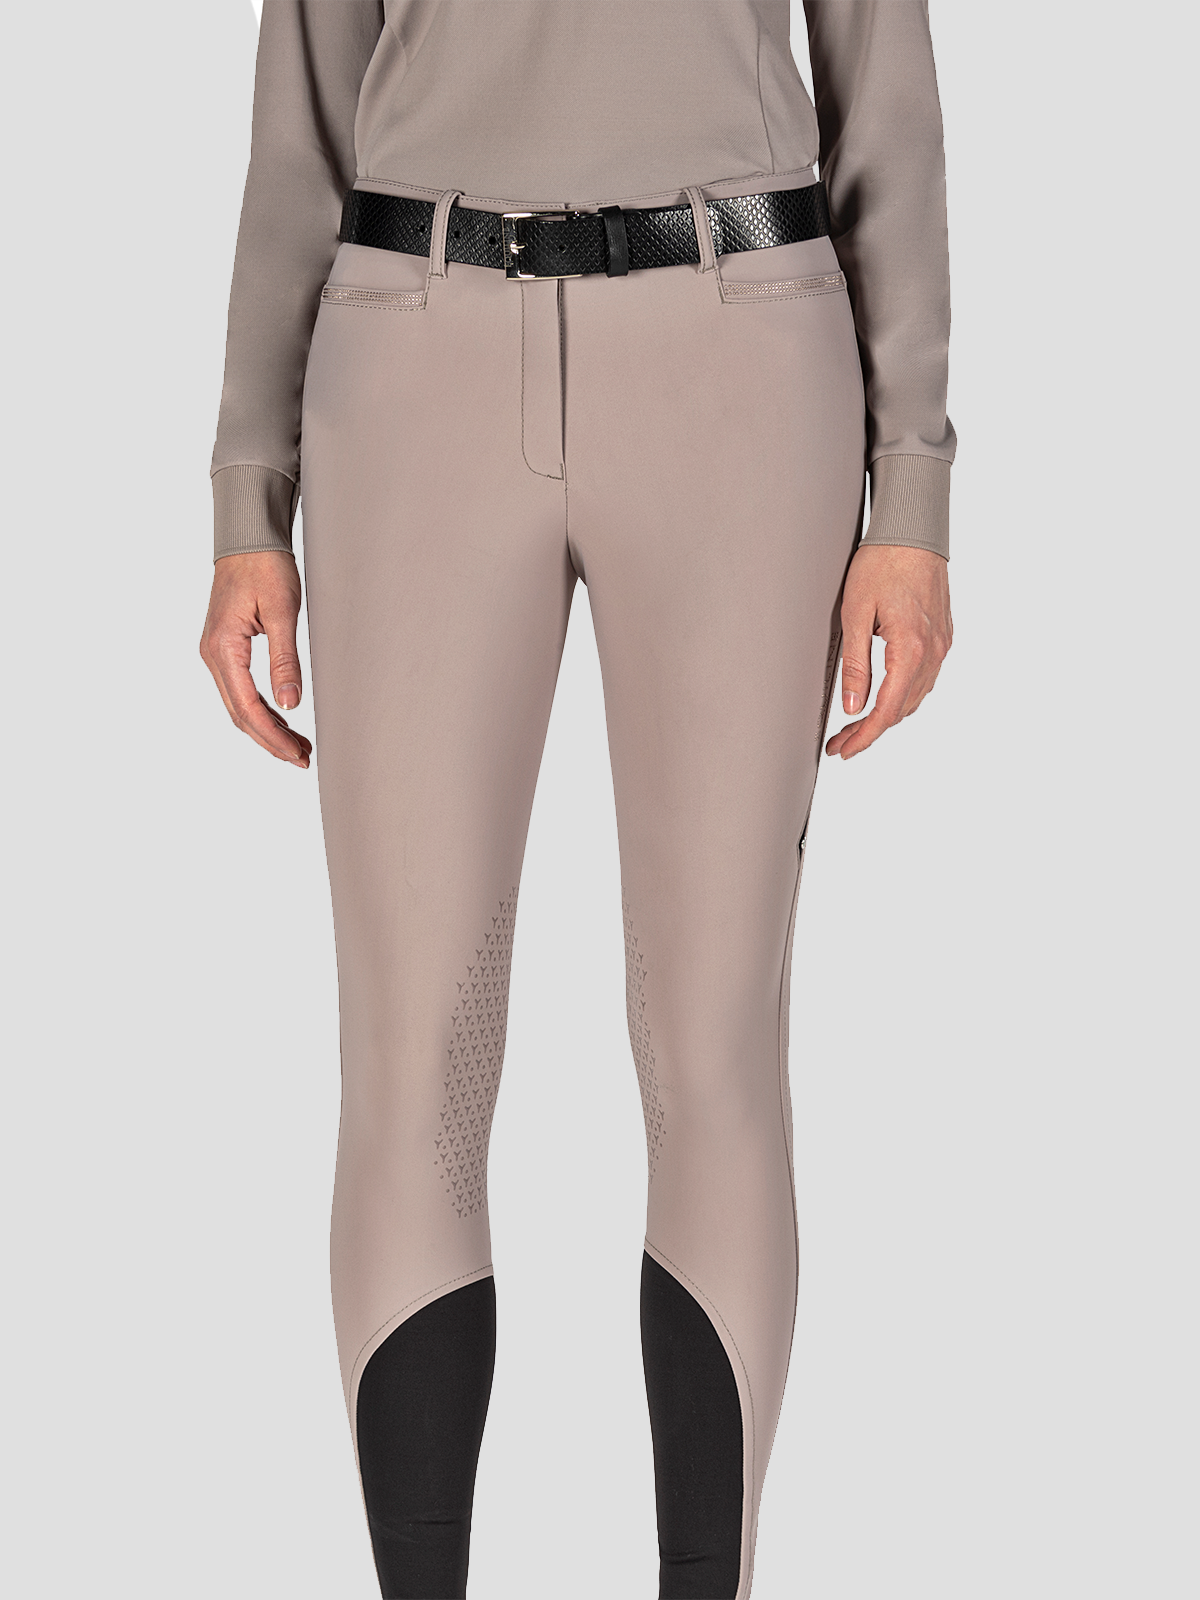 EricieK B-Move Light Ladies Knee Grip Breeches with UV Protection - front view